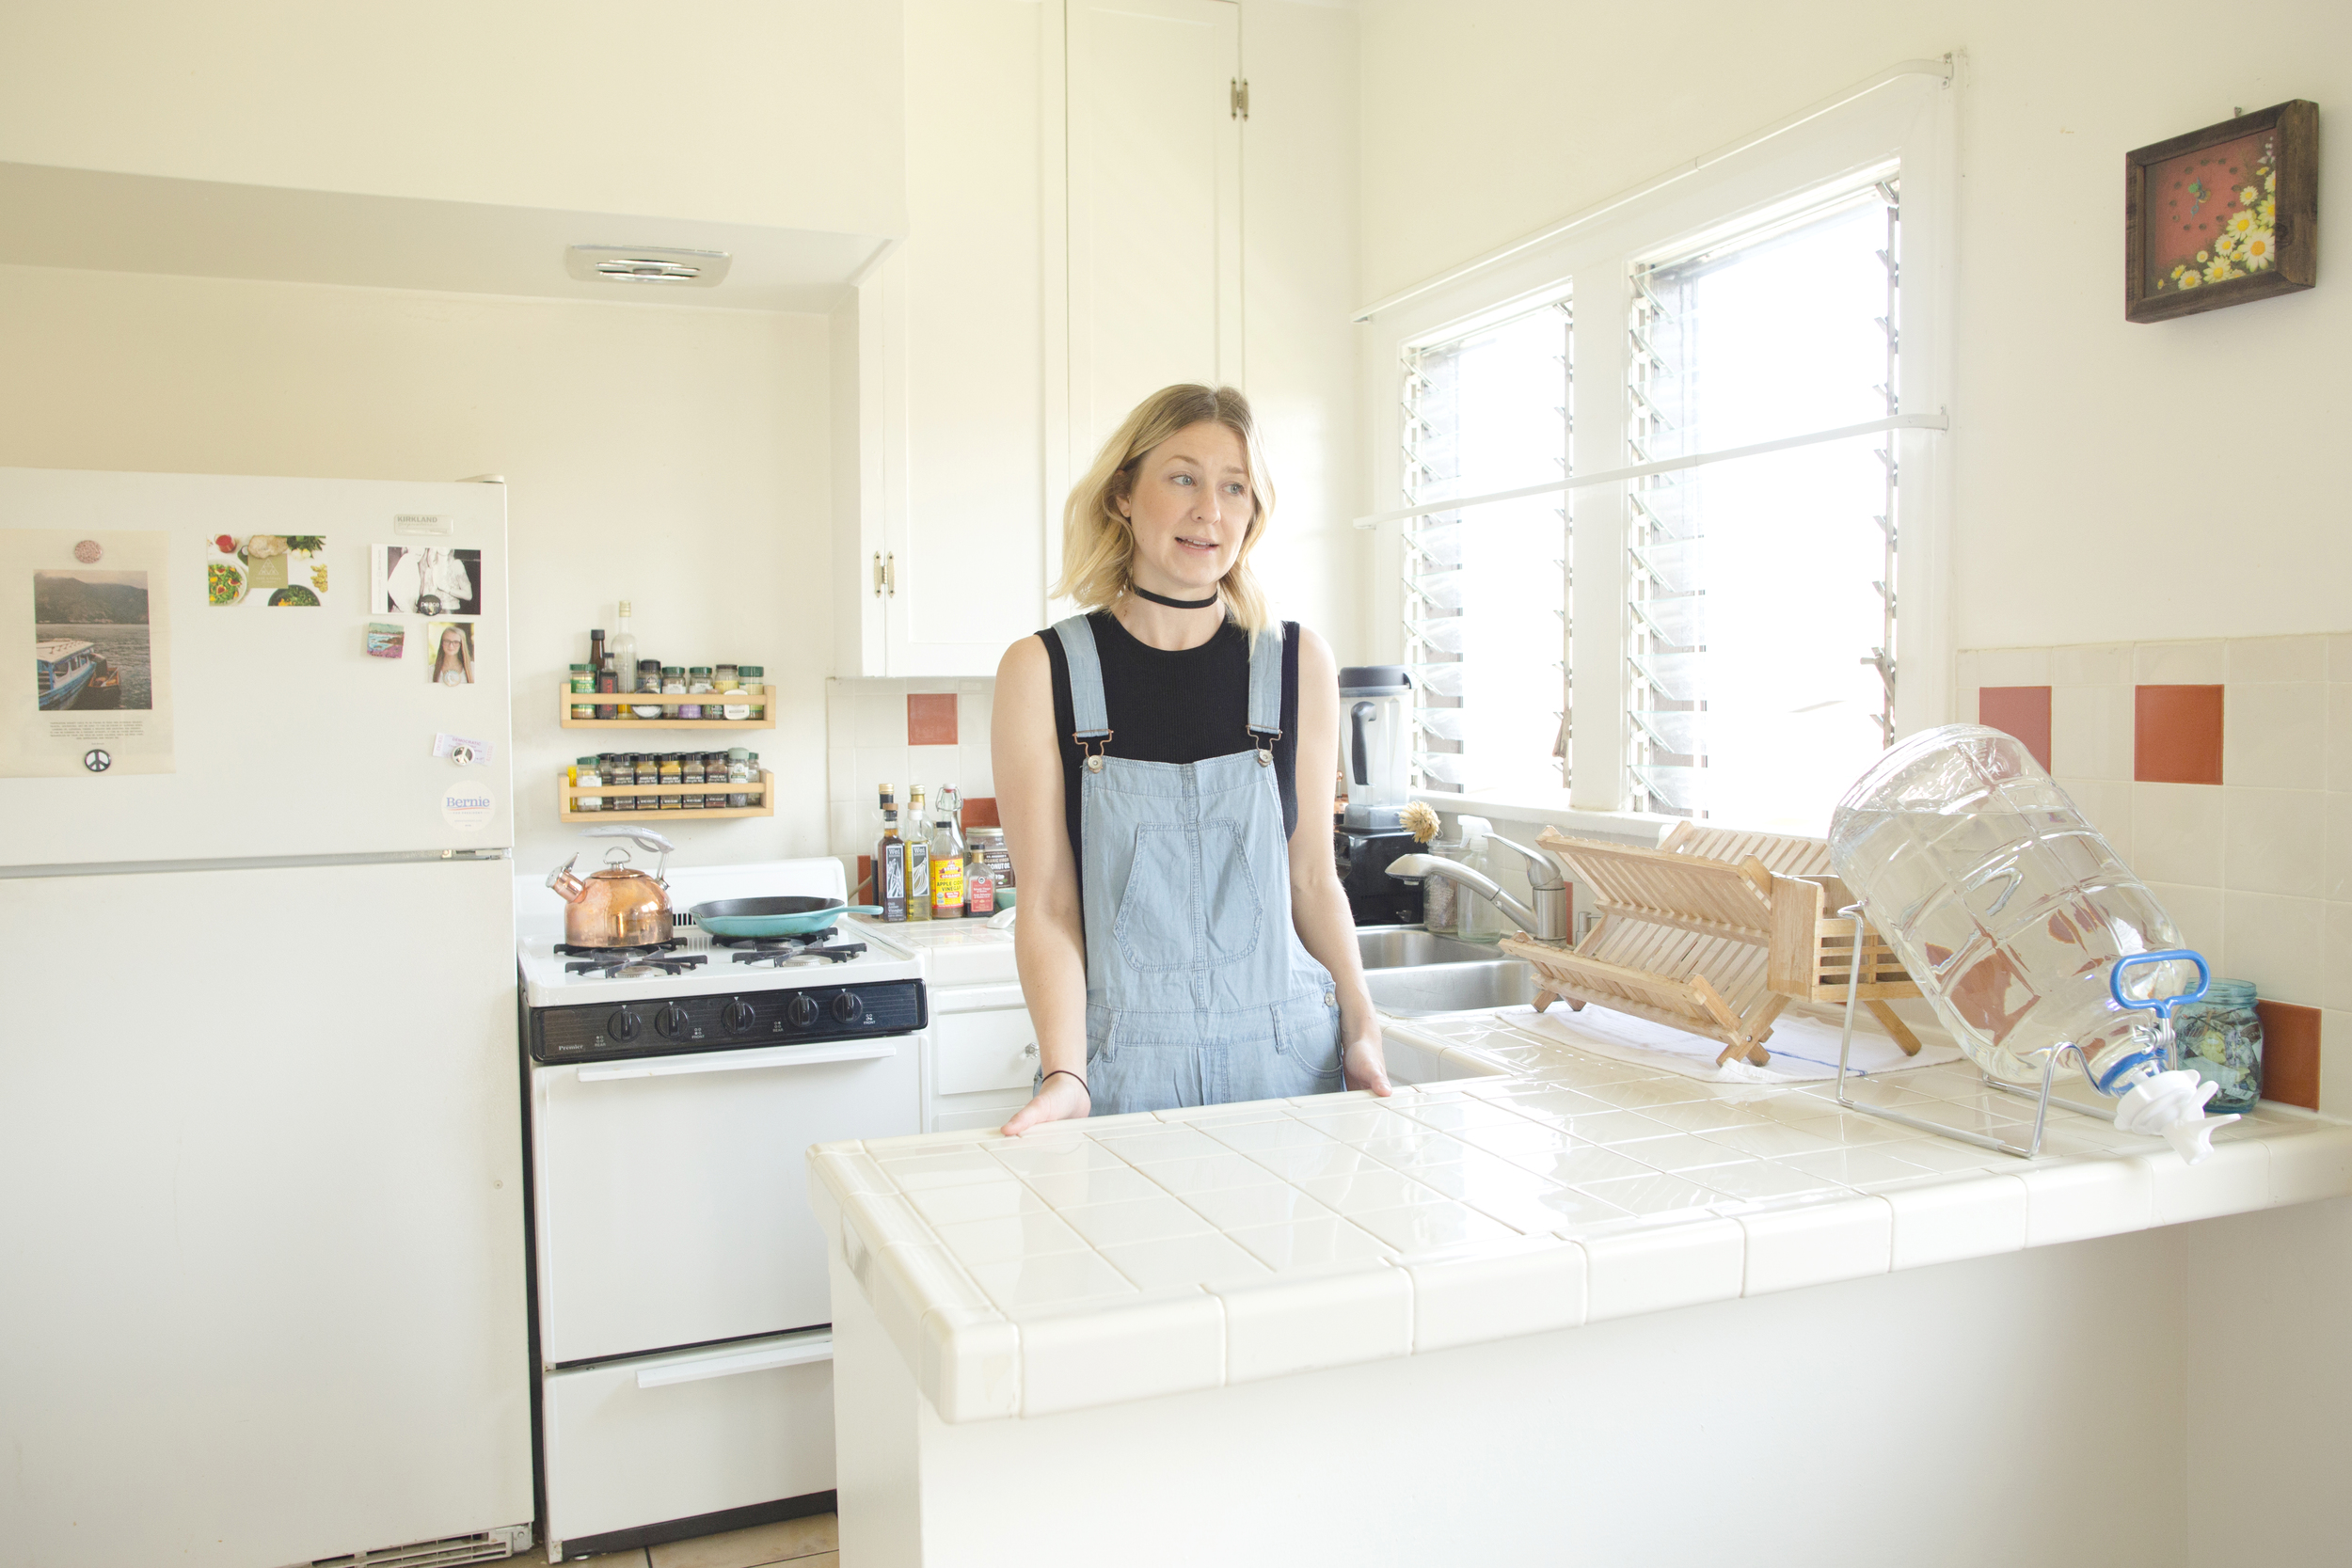   The place where it all started. To her left, a zero-waste alkaline glass water jug.  